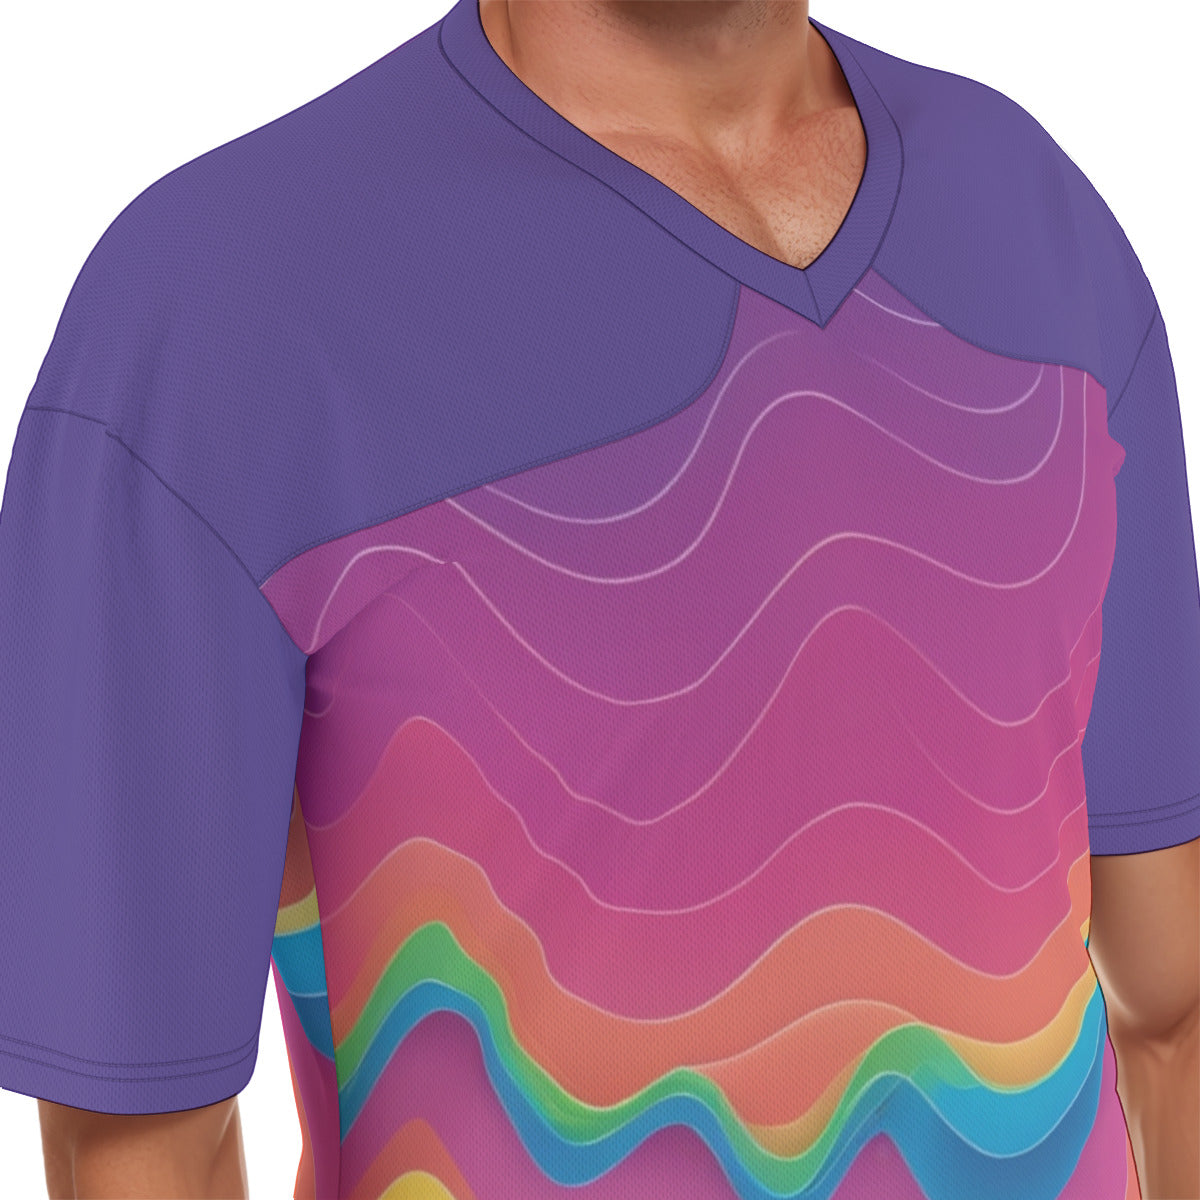 The Wave -- Men's Football Jersey